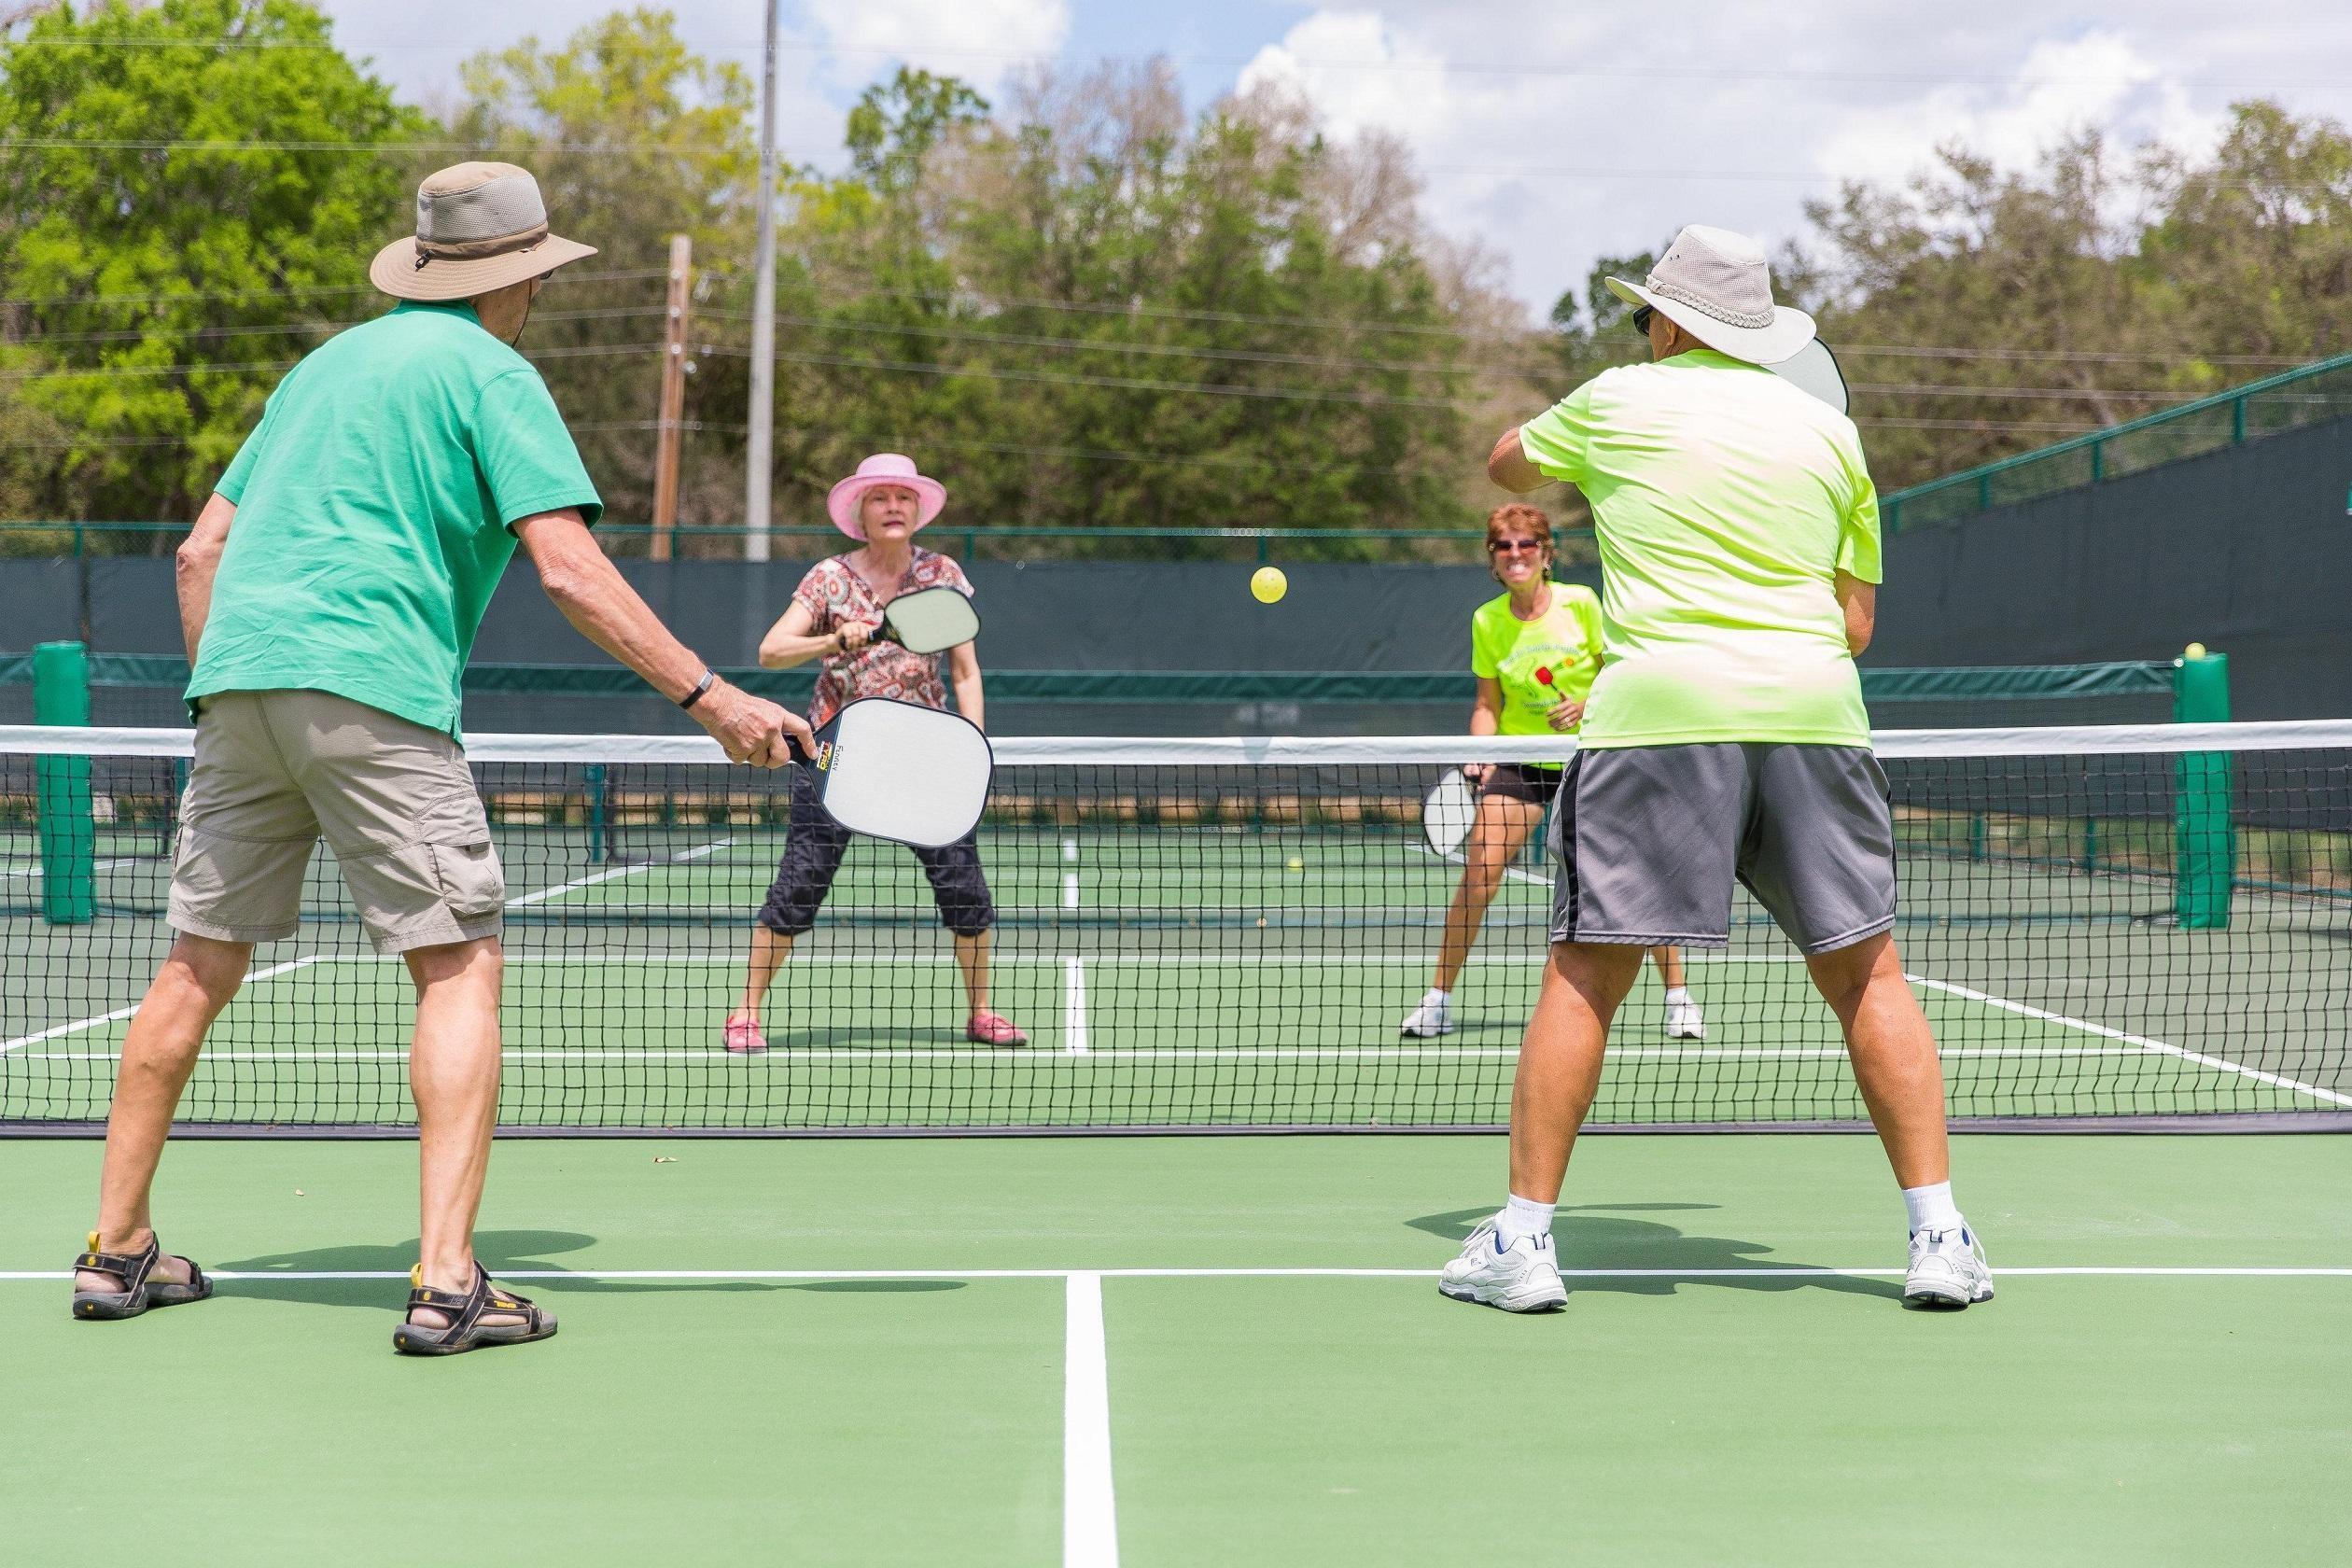 Four pickleball players in the middle of a pickleball game on a sunny day